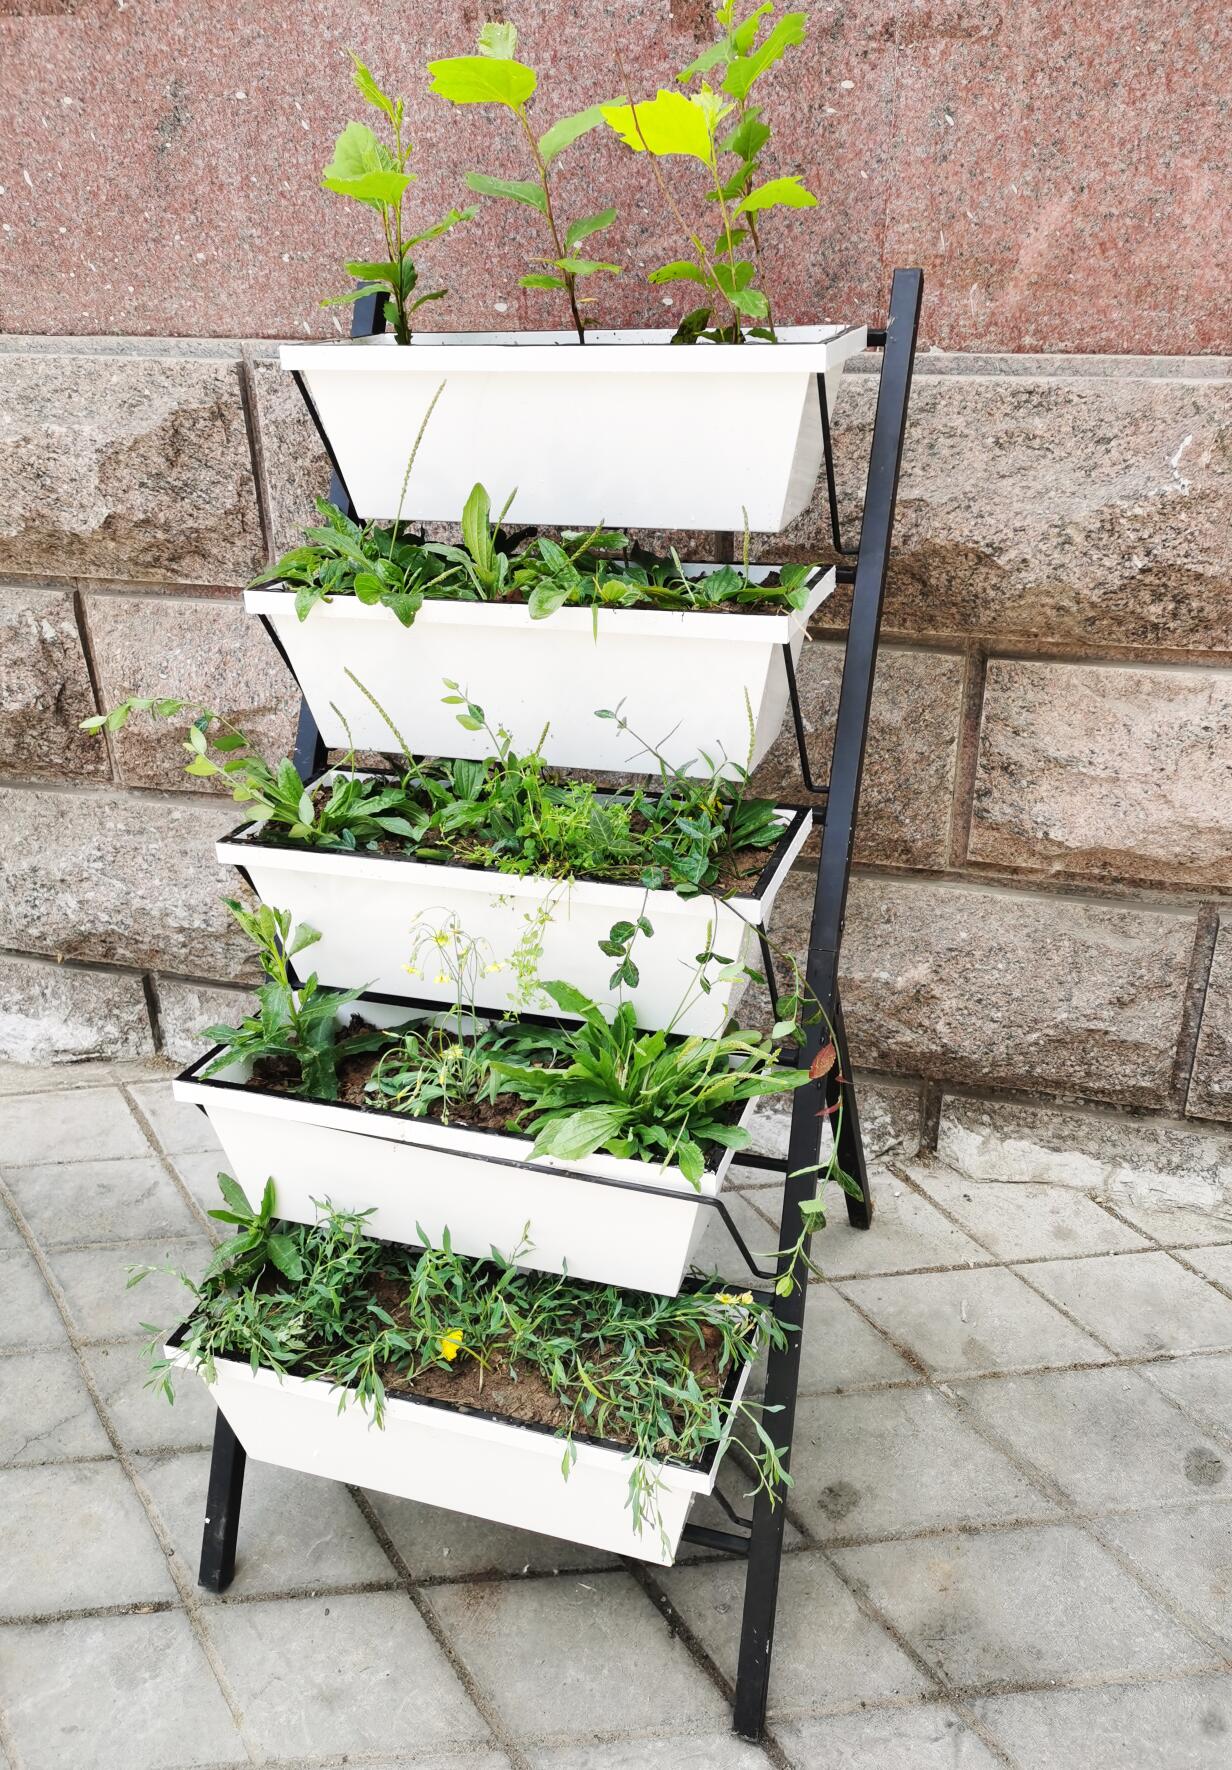 Better Homes and Gardens Metal Herbs Growing Planter,White,Black Stand - image 9 of 10